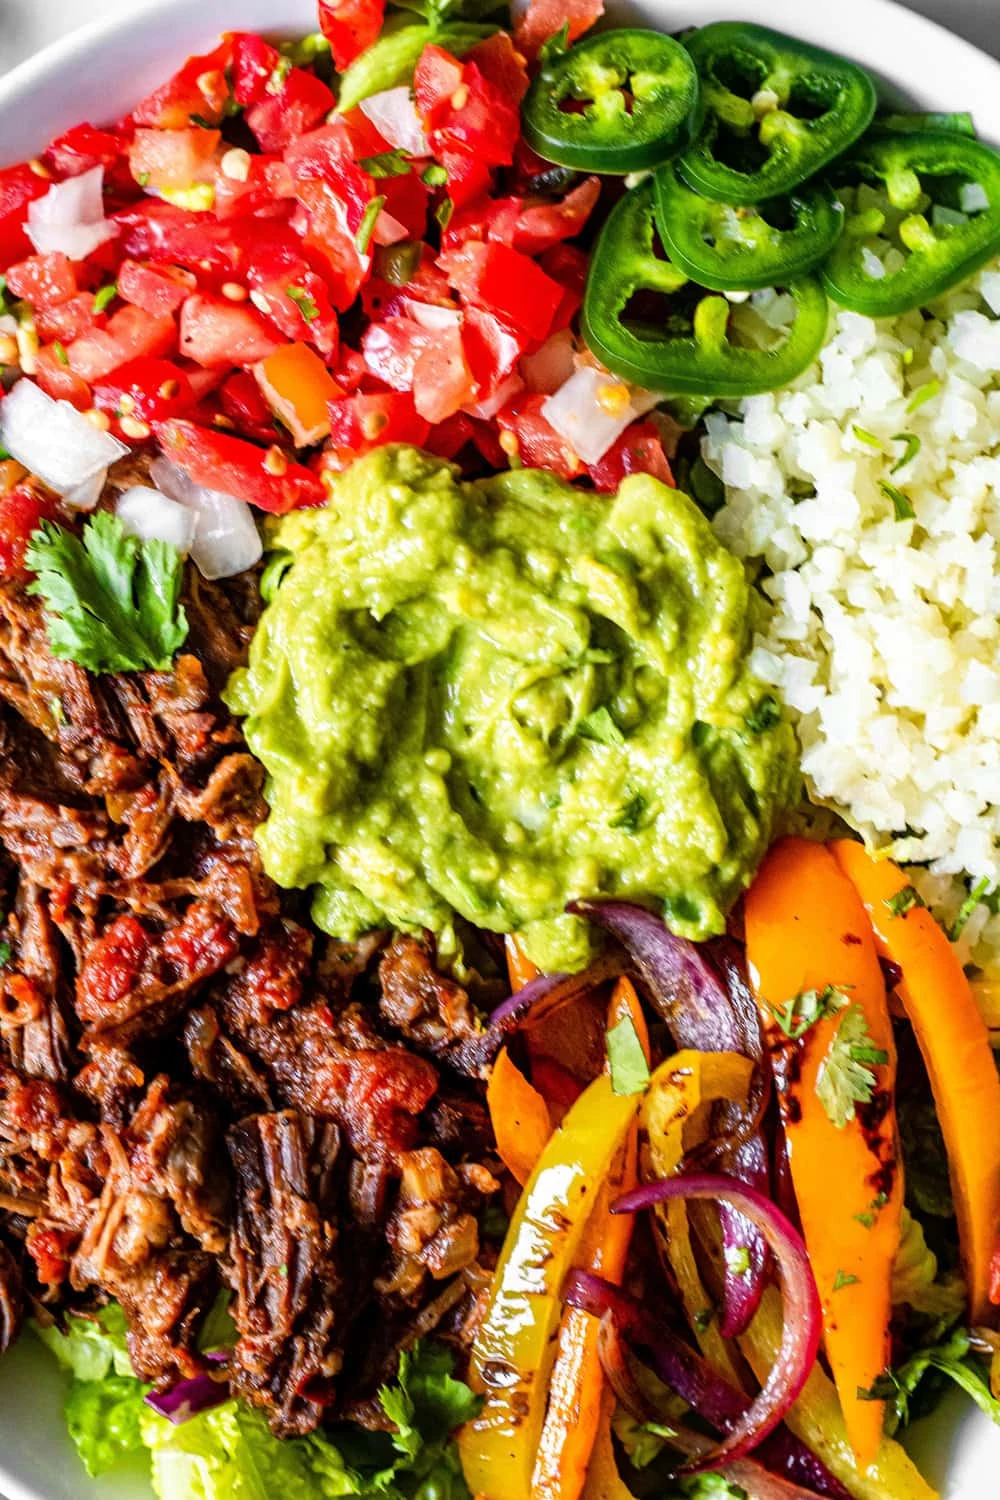 Slow Cooker Chipotle Beef toppings.jpg